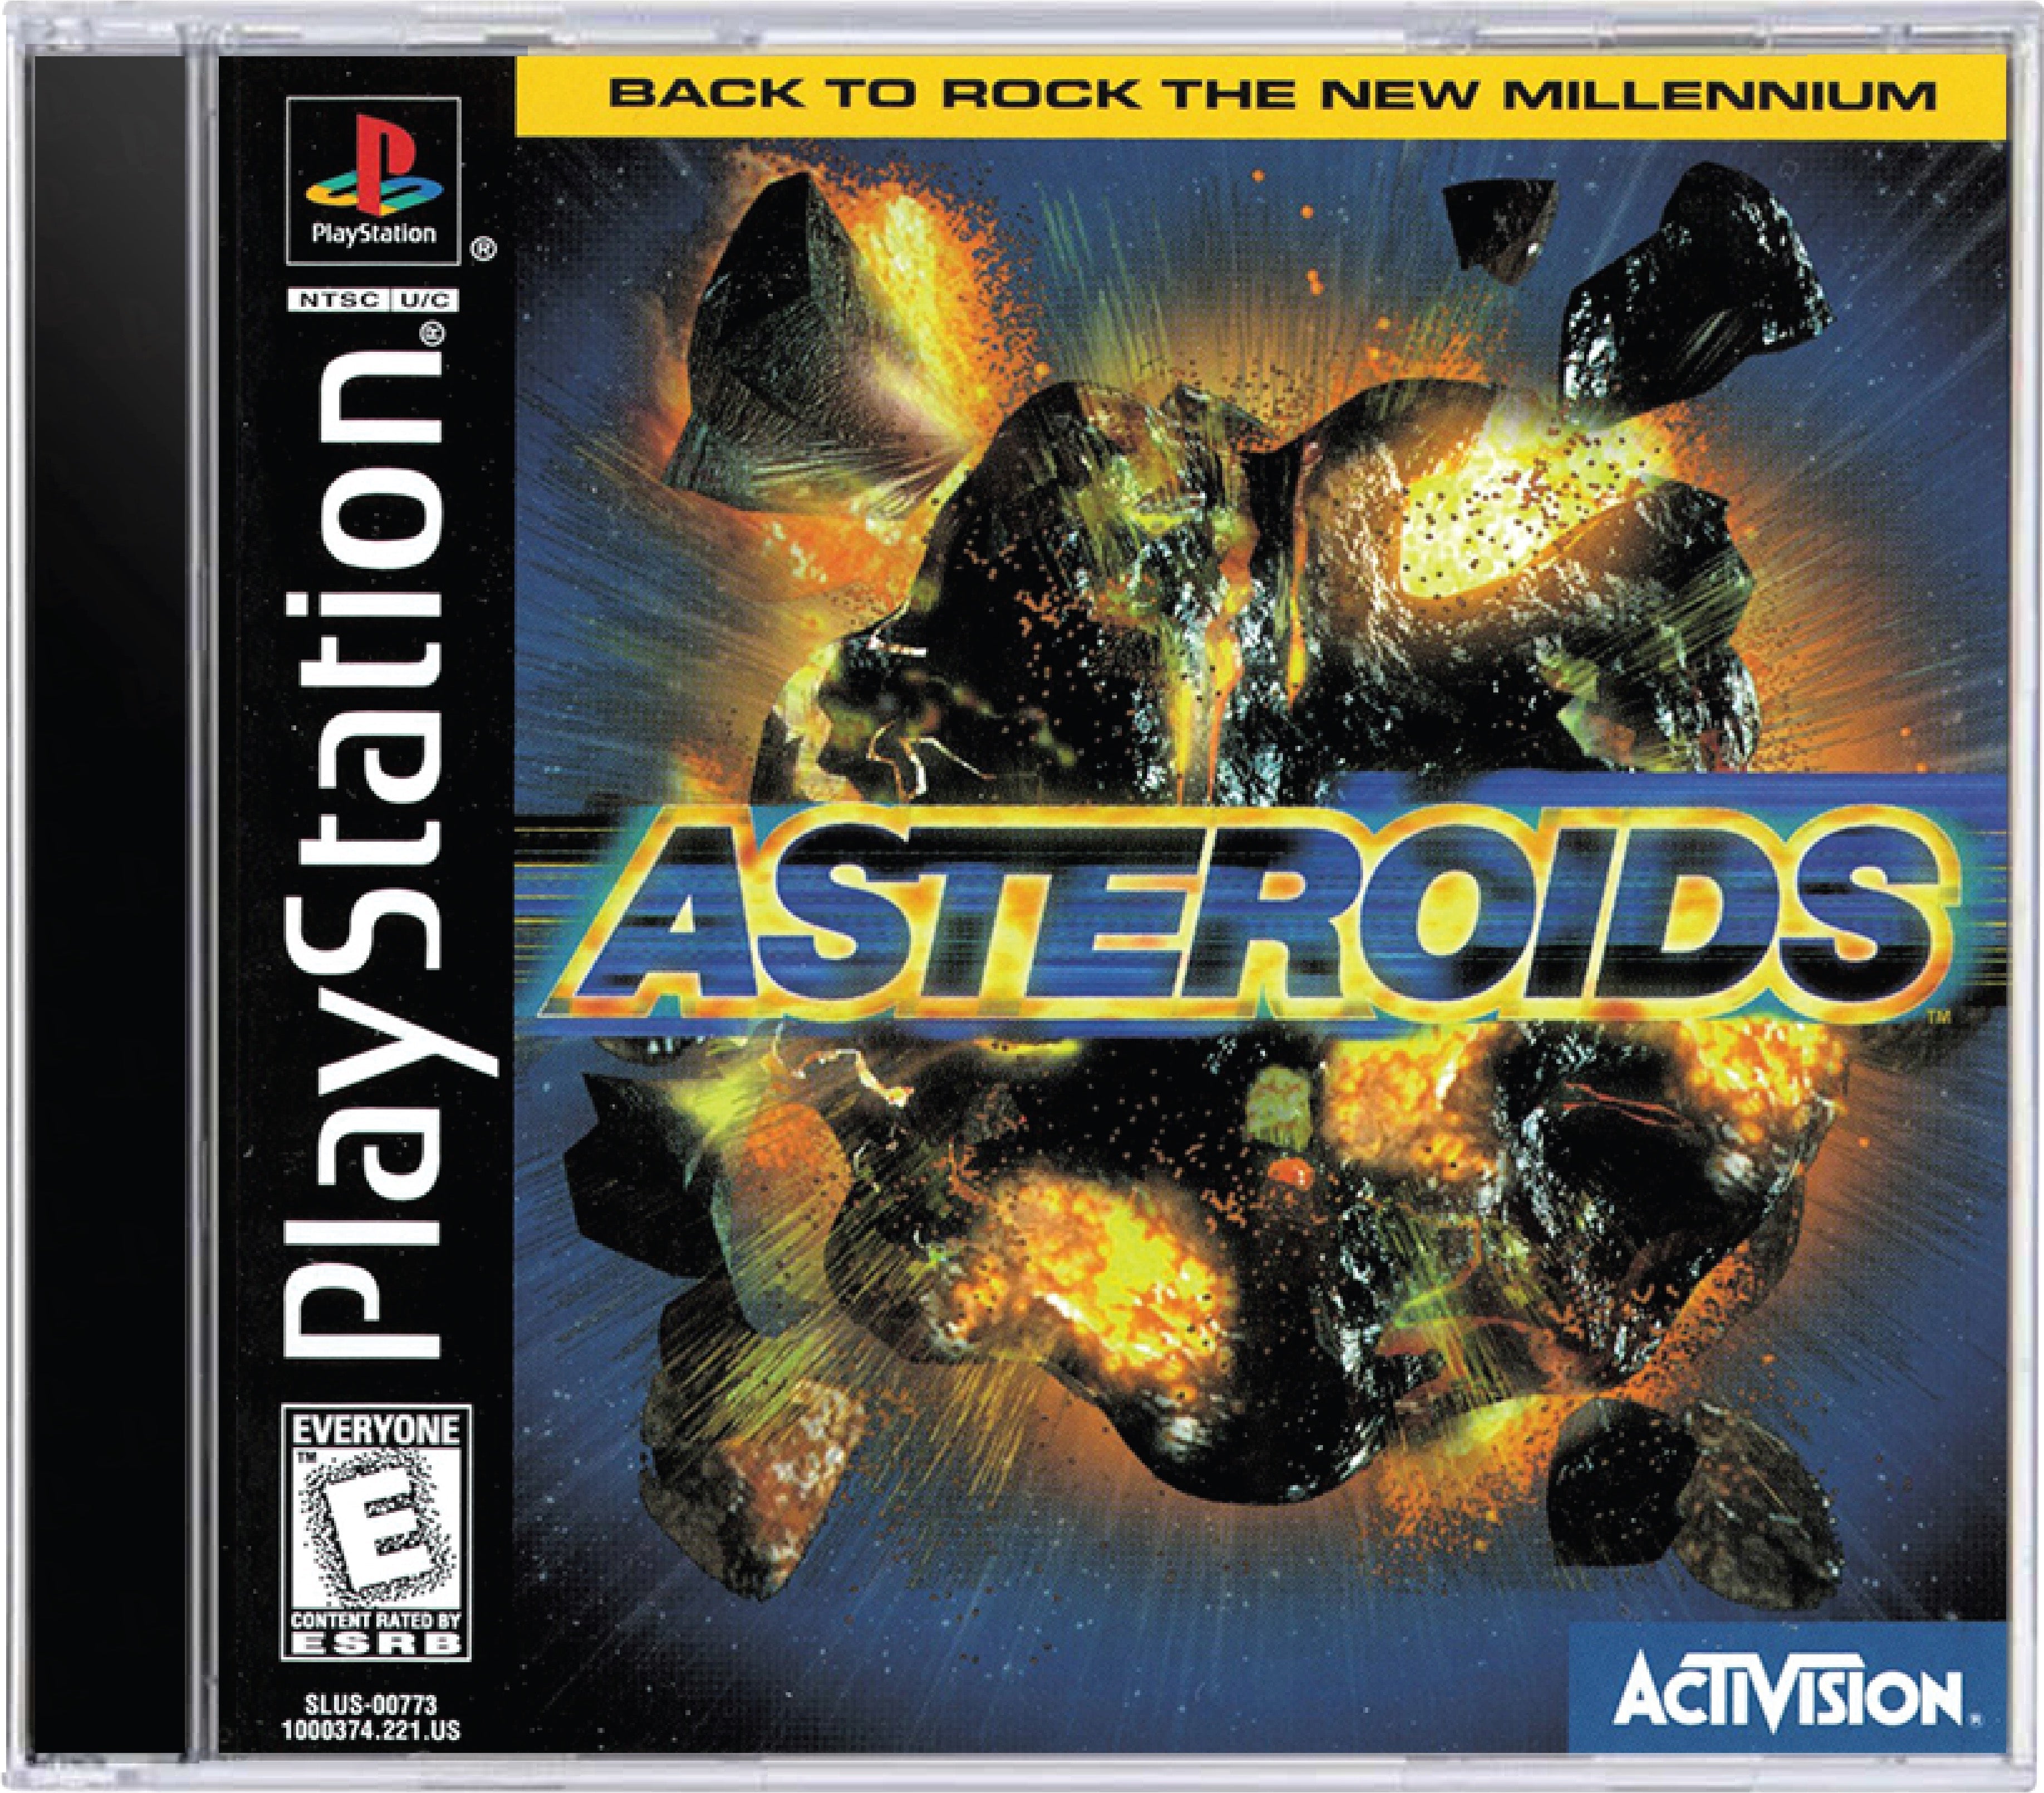 Asteroids Cover Art and Product Photo